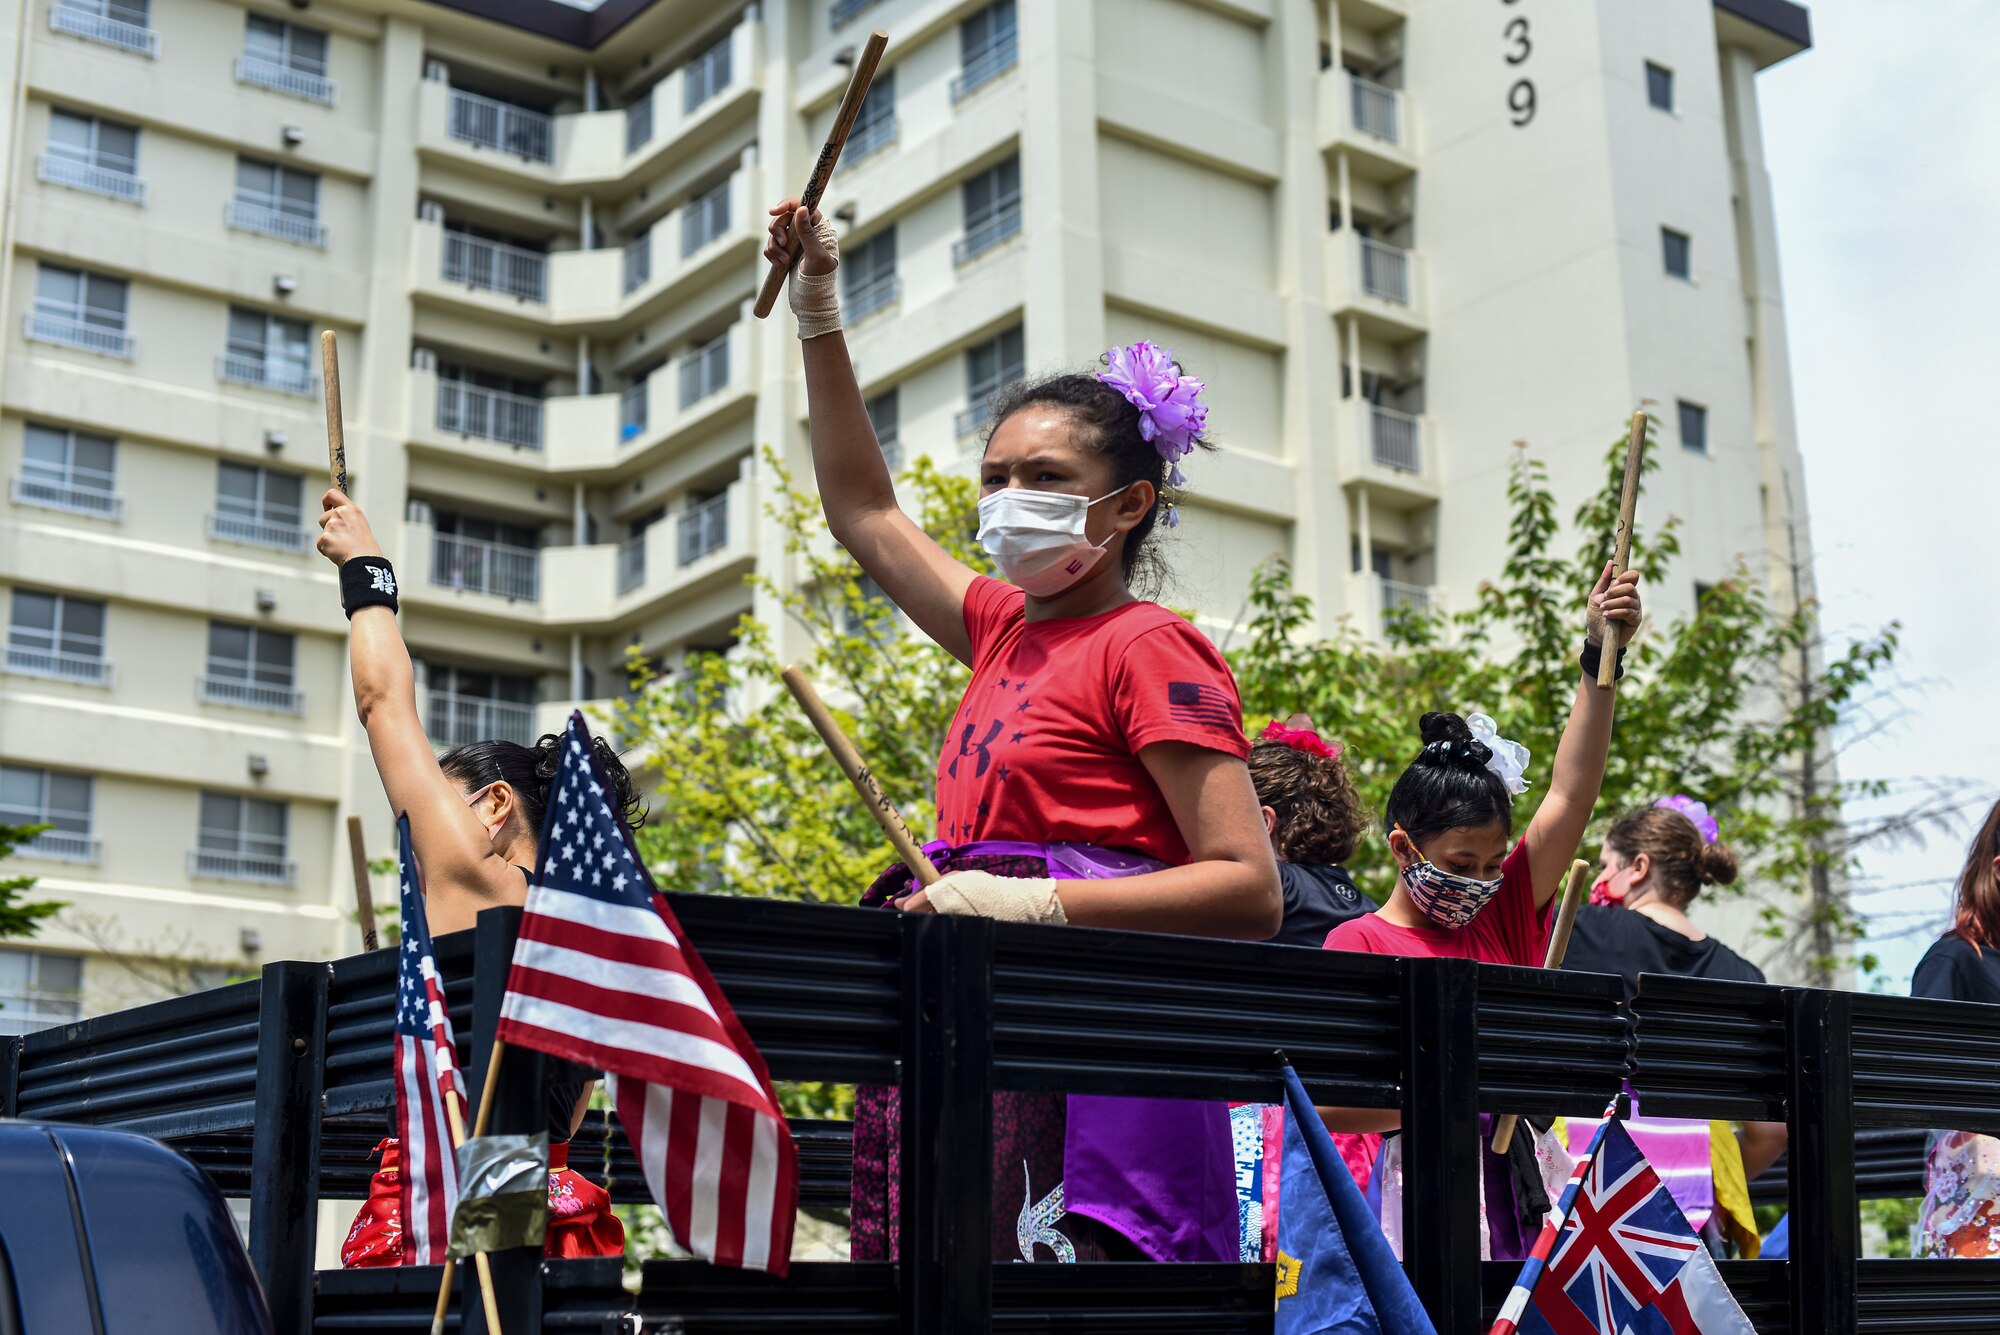 Since the pandemic, members had to make adjustments in their personal lives to combat the spread of COVID-19. This parade provided an opportunity for members to showcase their resiliency and demonstrate their positivity by supporting their community.